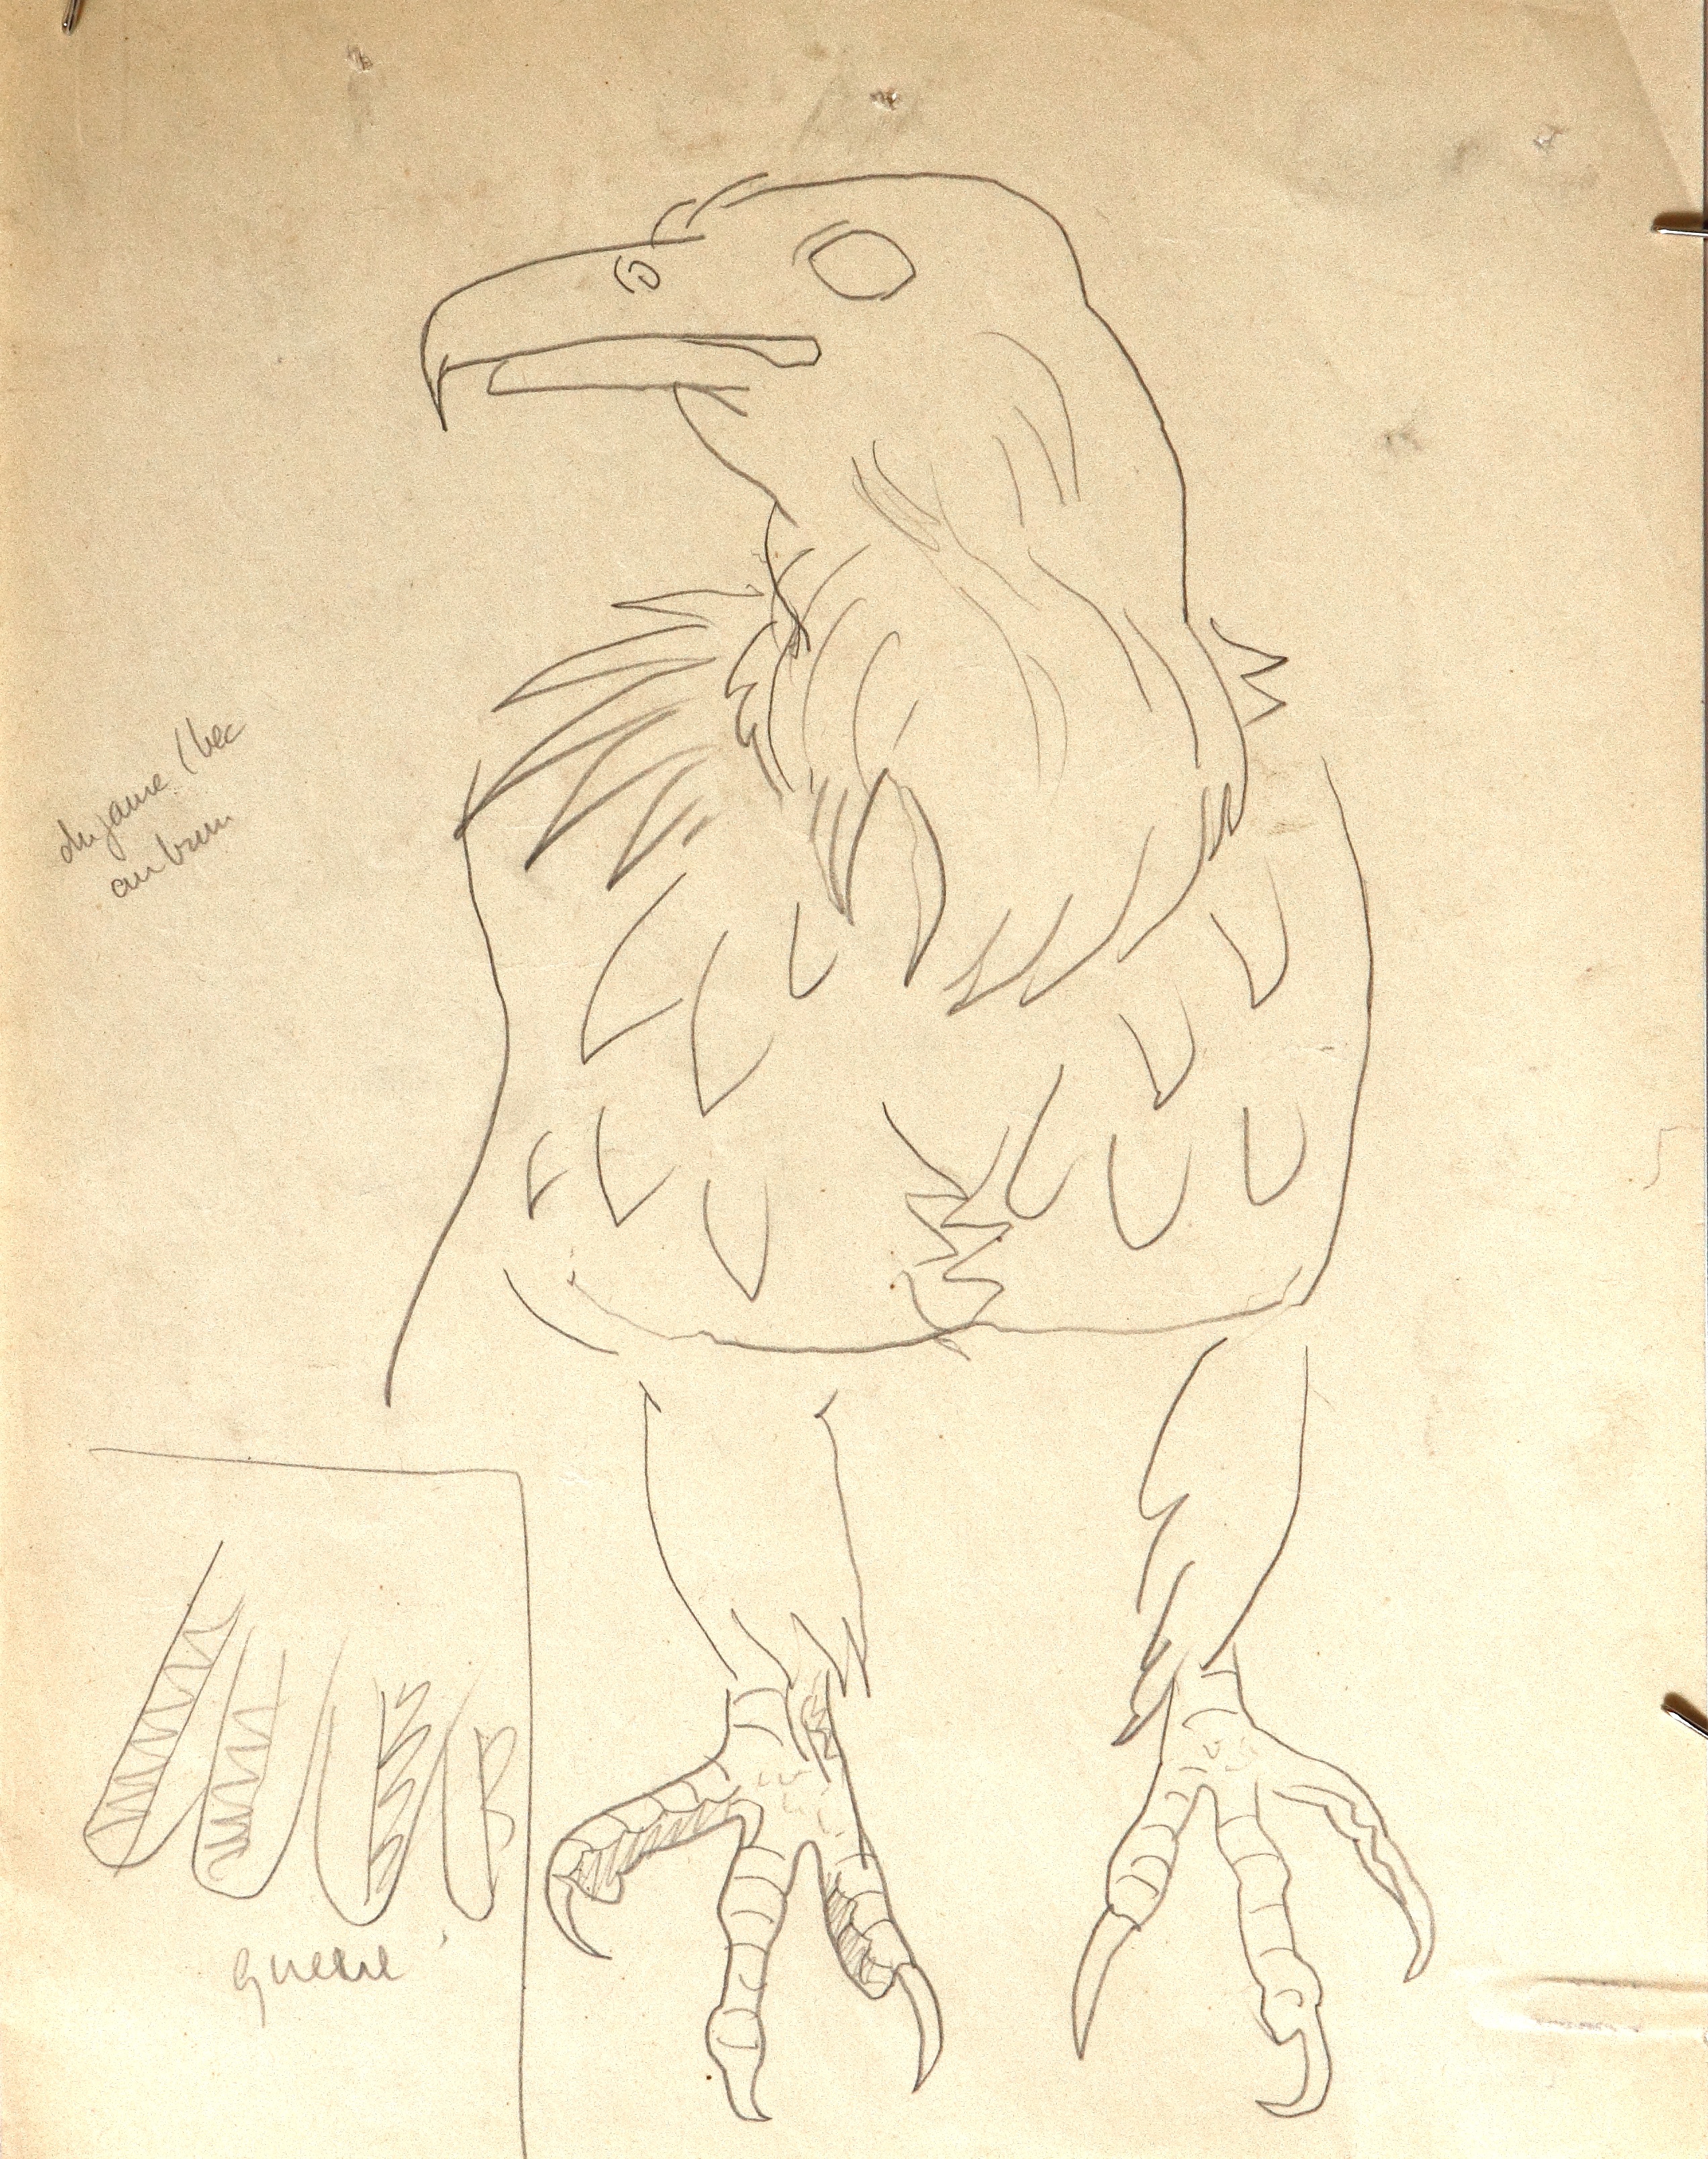 Preparatory sketch.  Shield of the National University of Mexico, with Eagle and Condor.  Jean Charlot.